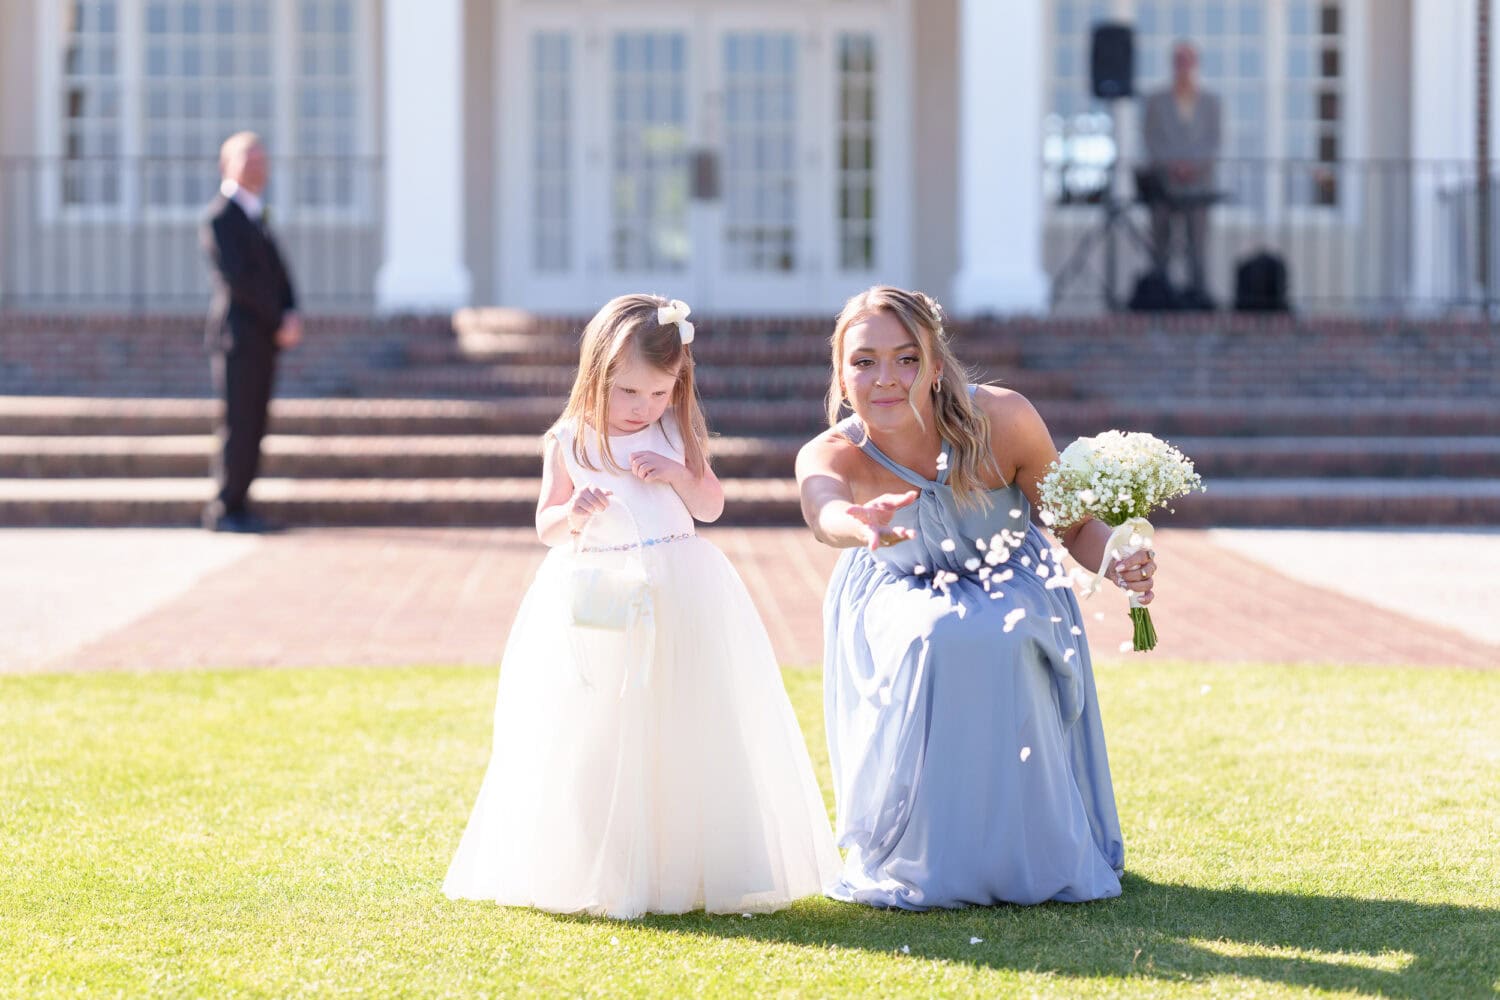 Trying to get flowergirl to throw the flowers - Pawleys Plantation